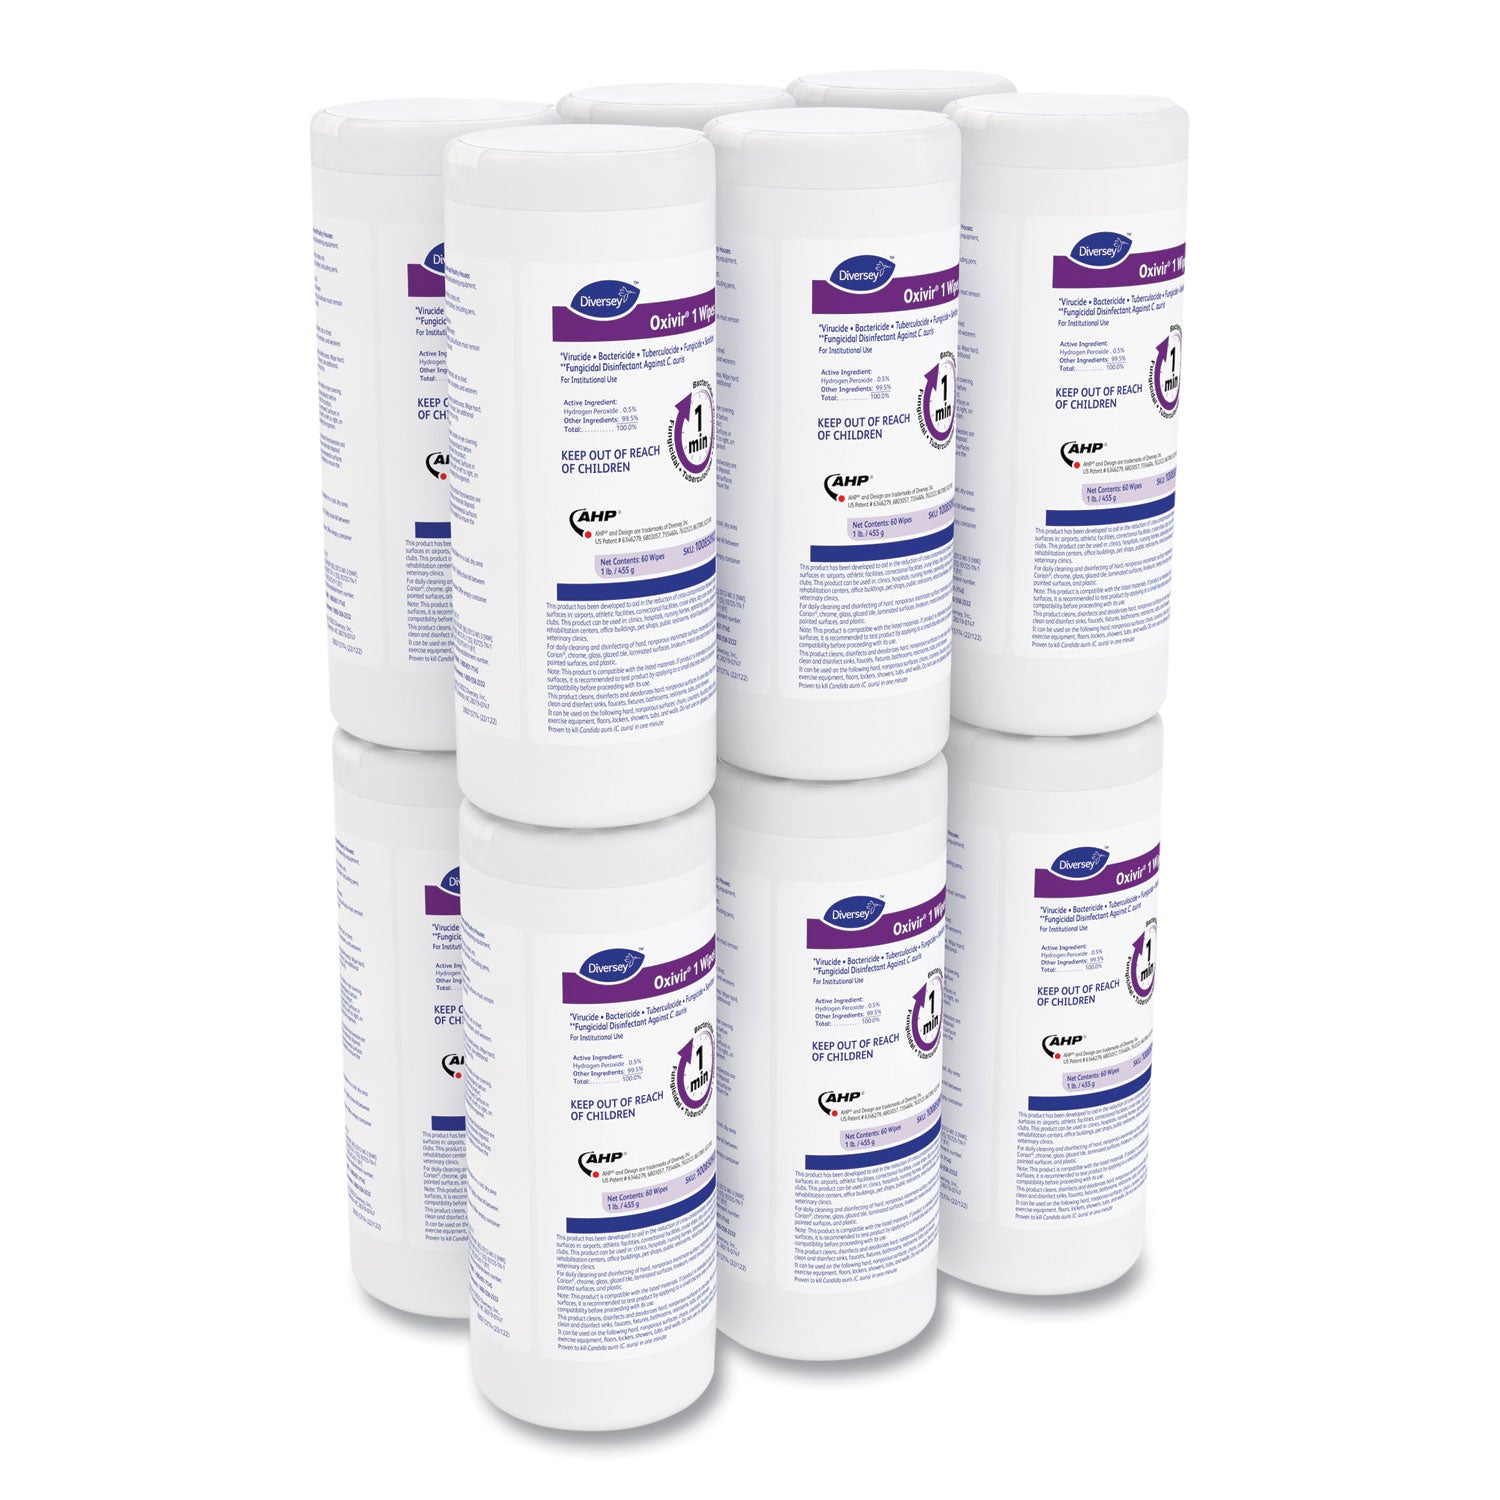 oxivir-1-wipes-1-ply-7-x-8-60-canister-12-canisters-carton_dvo100850922 - 4